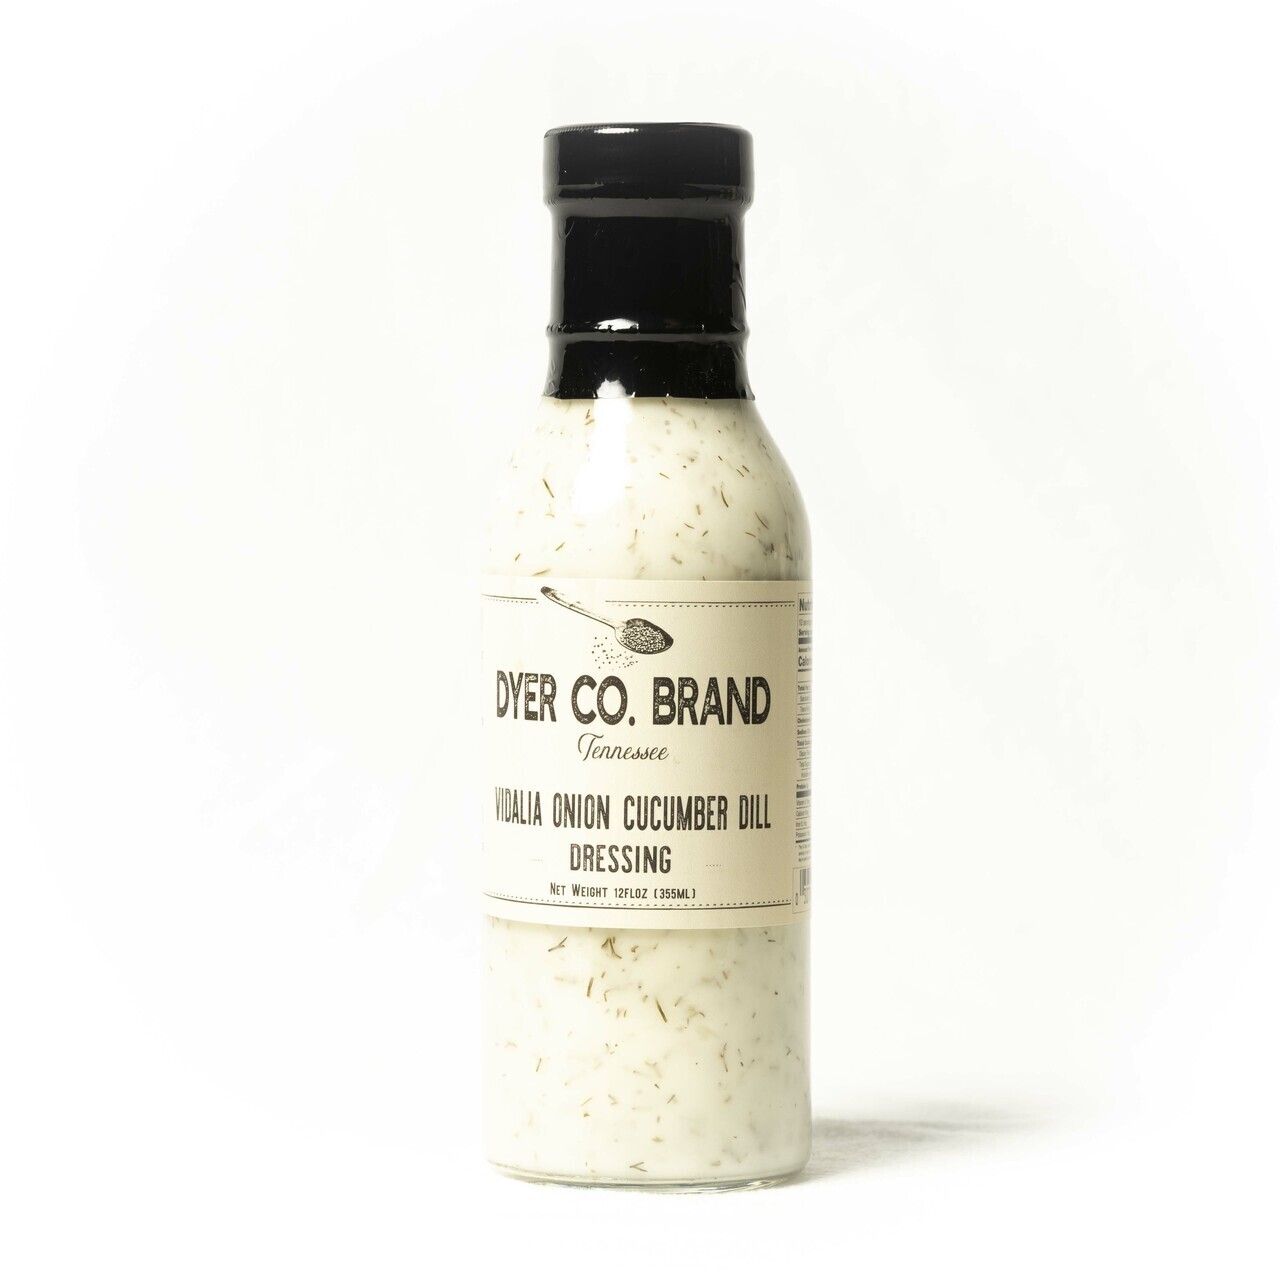 Dyer Co Brand Cucumber Dill Dressing